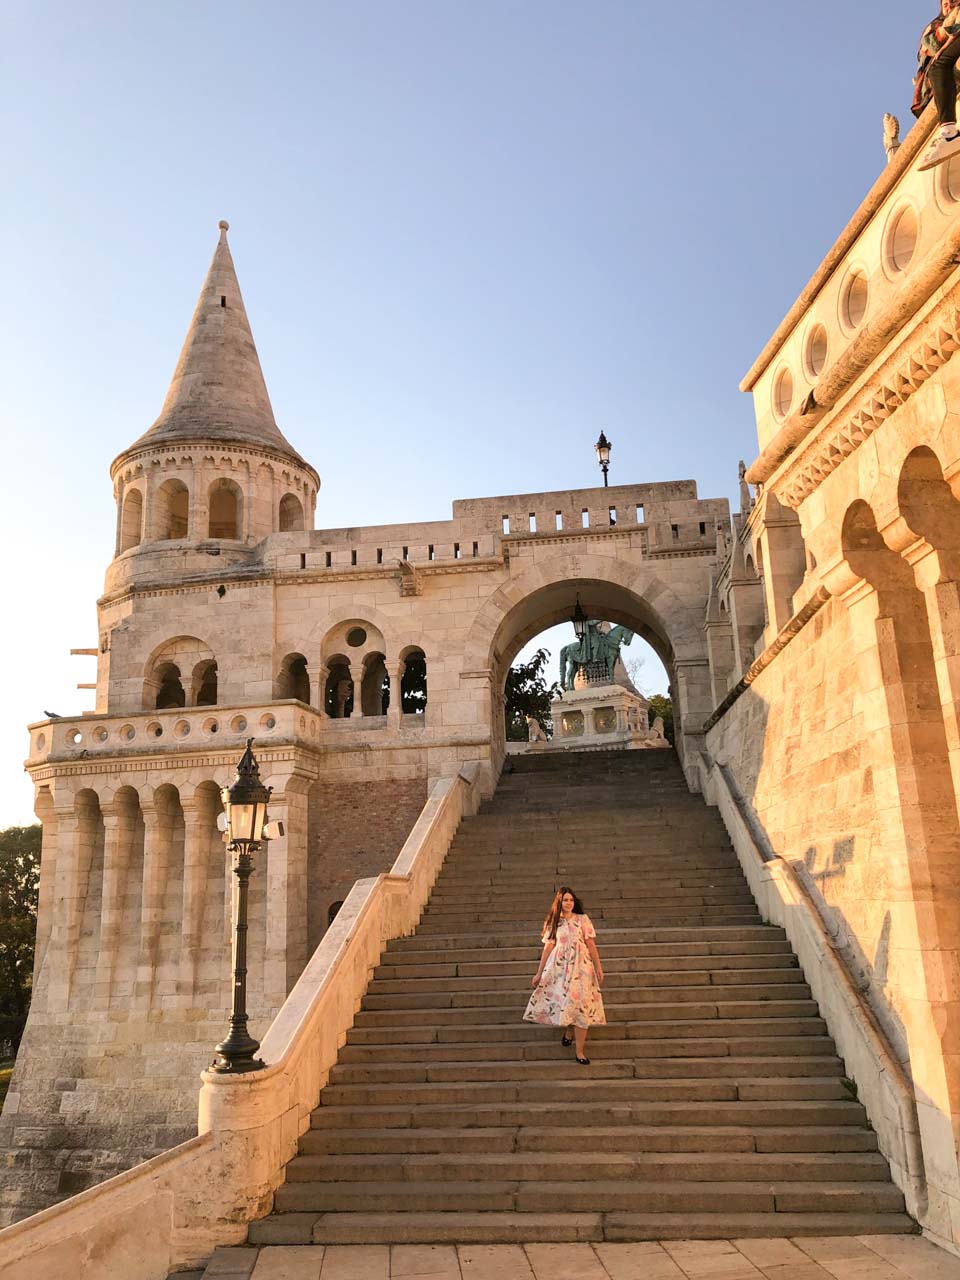 A girl in a maxi dress walking down the stairs of the Fisherman's Bastion in Budapest, Hungary